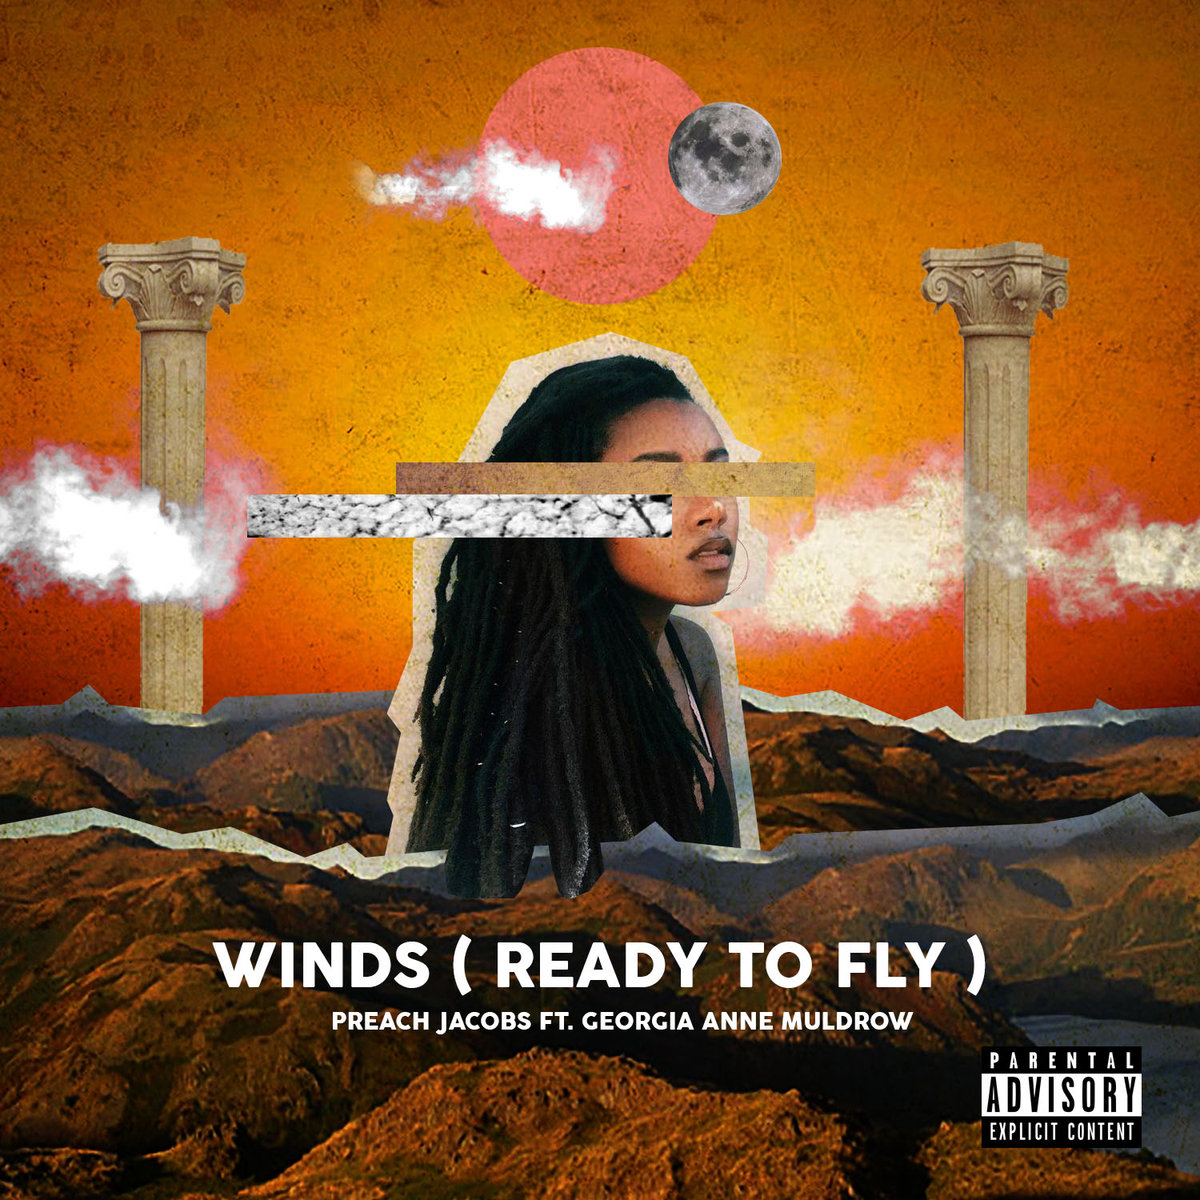 Preach Jacobs – Winds (Ready to Fly) ft. Georgia Anne Muldrow